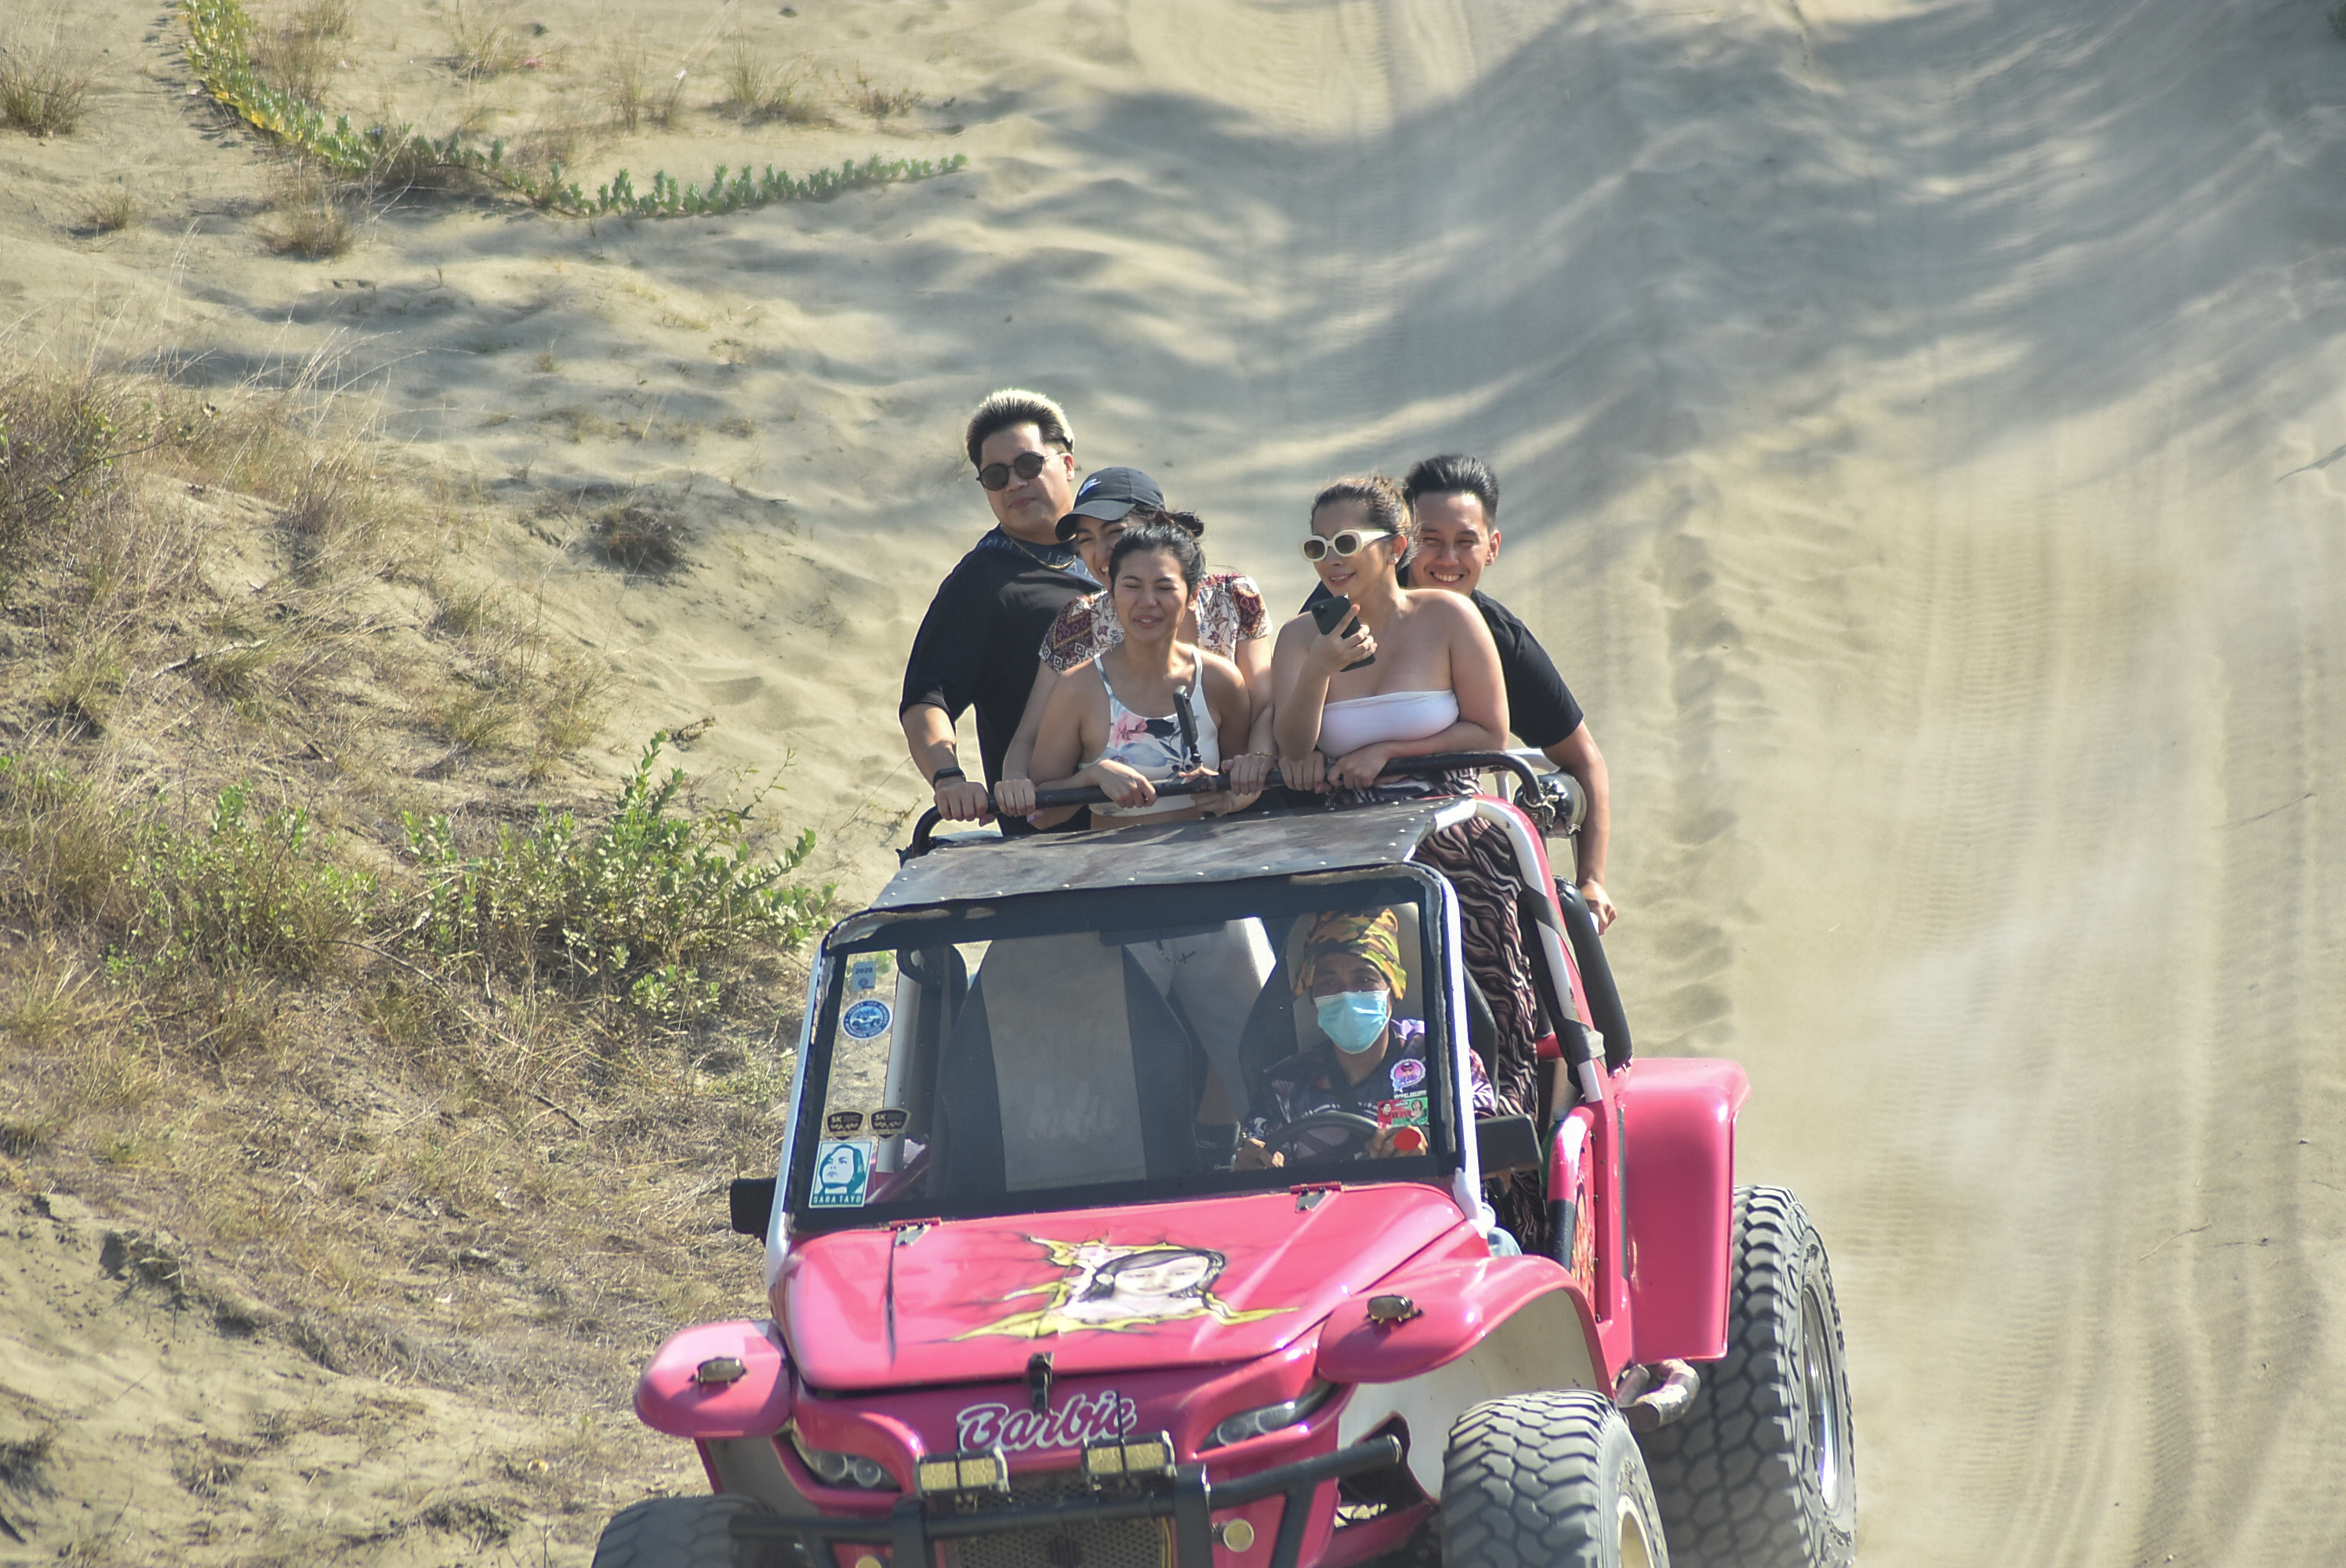 Paoay Sand Dunes 4X4 and Sandboarding Adventure